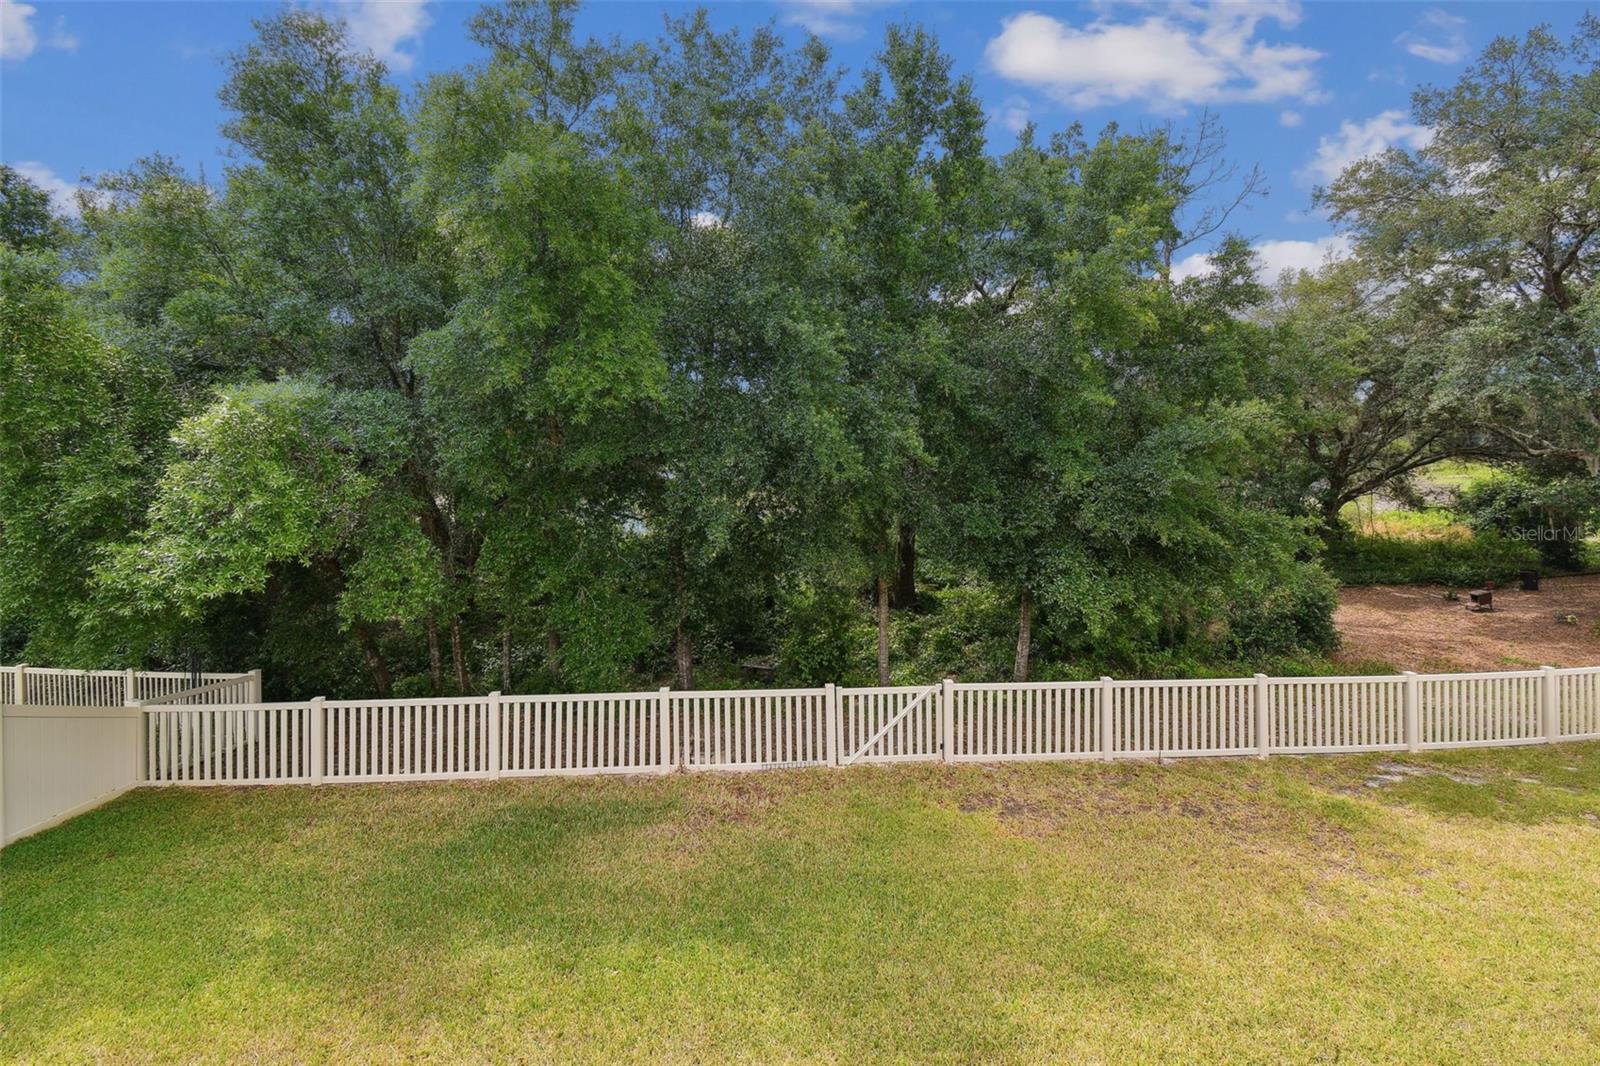 view of the private fully fenced in back yard